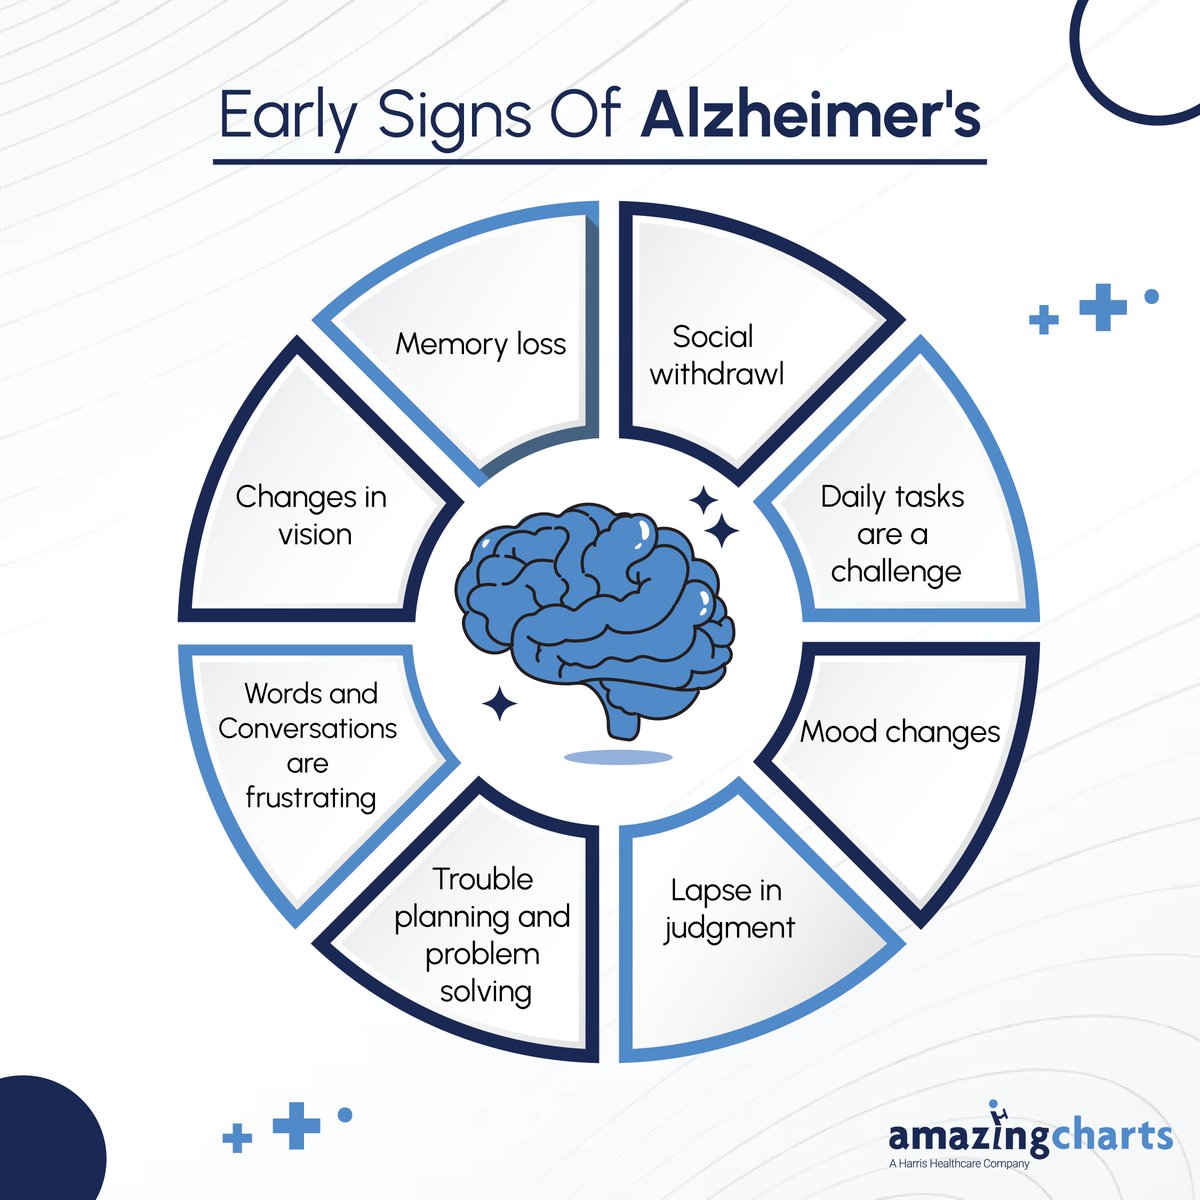 Recognizing the early signs of Alzheimer's is crucial for timely intervention and support. Let's spread awareness and support those affected.

#EndAlzheimers #AlzheimersAwareness'